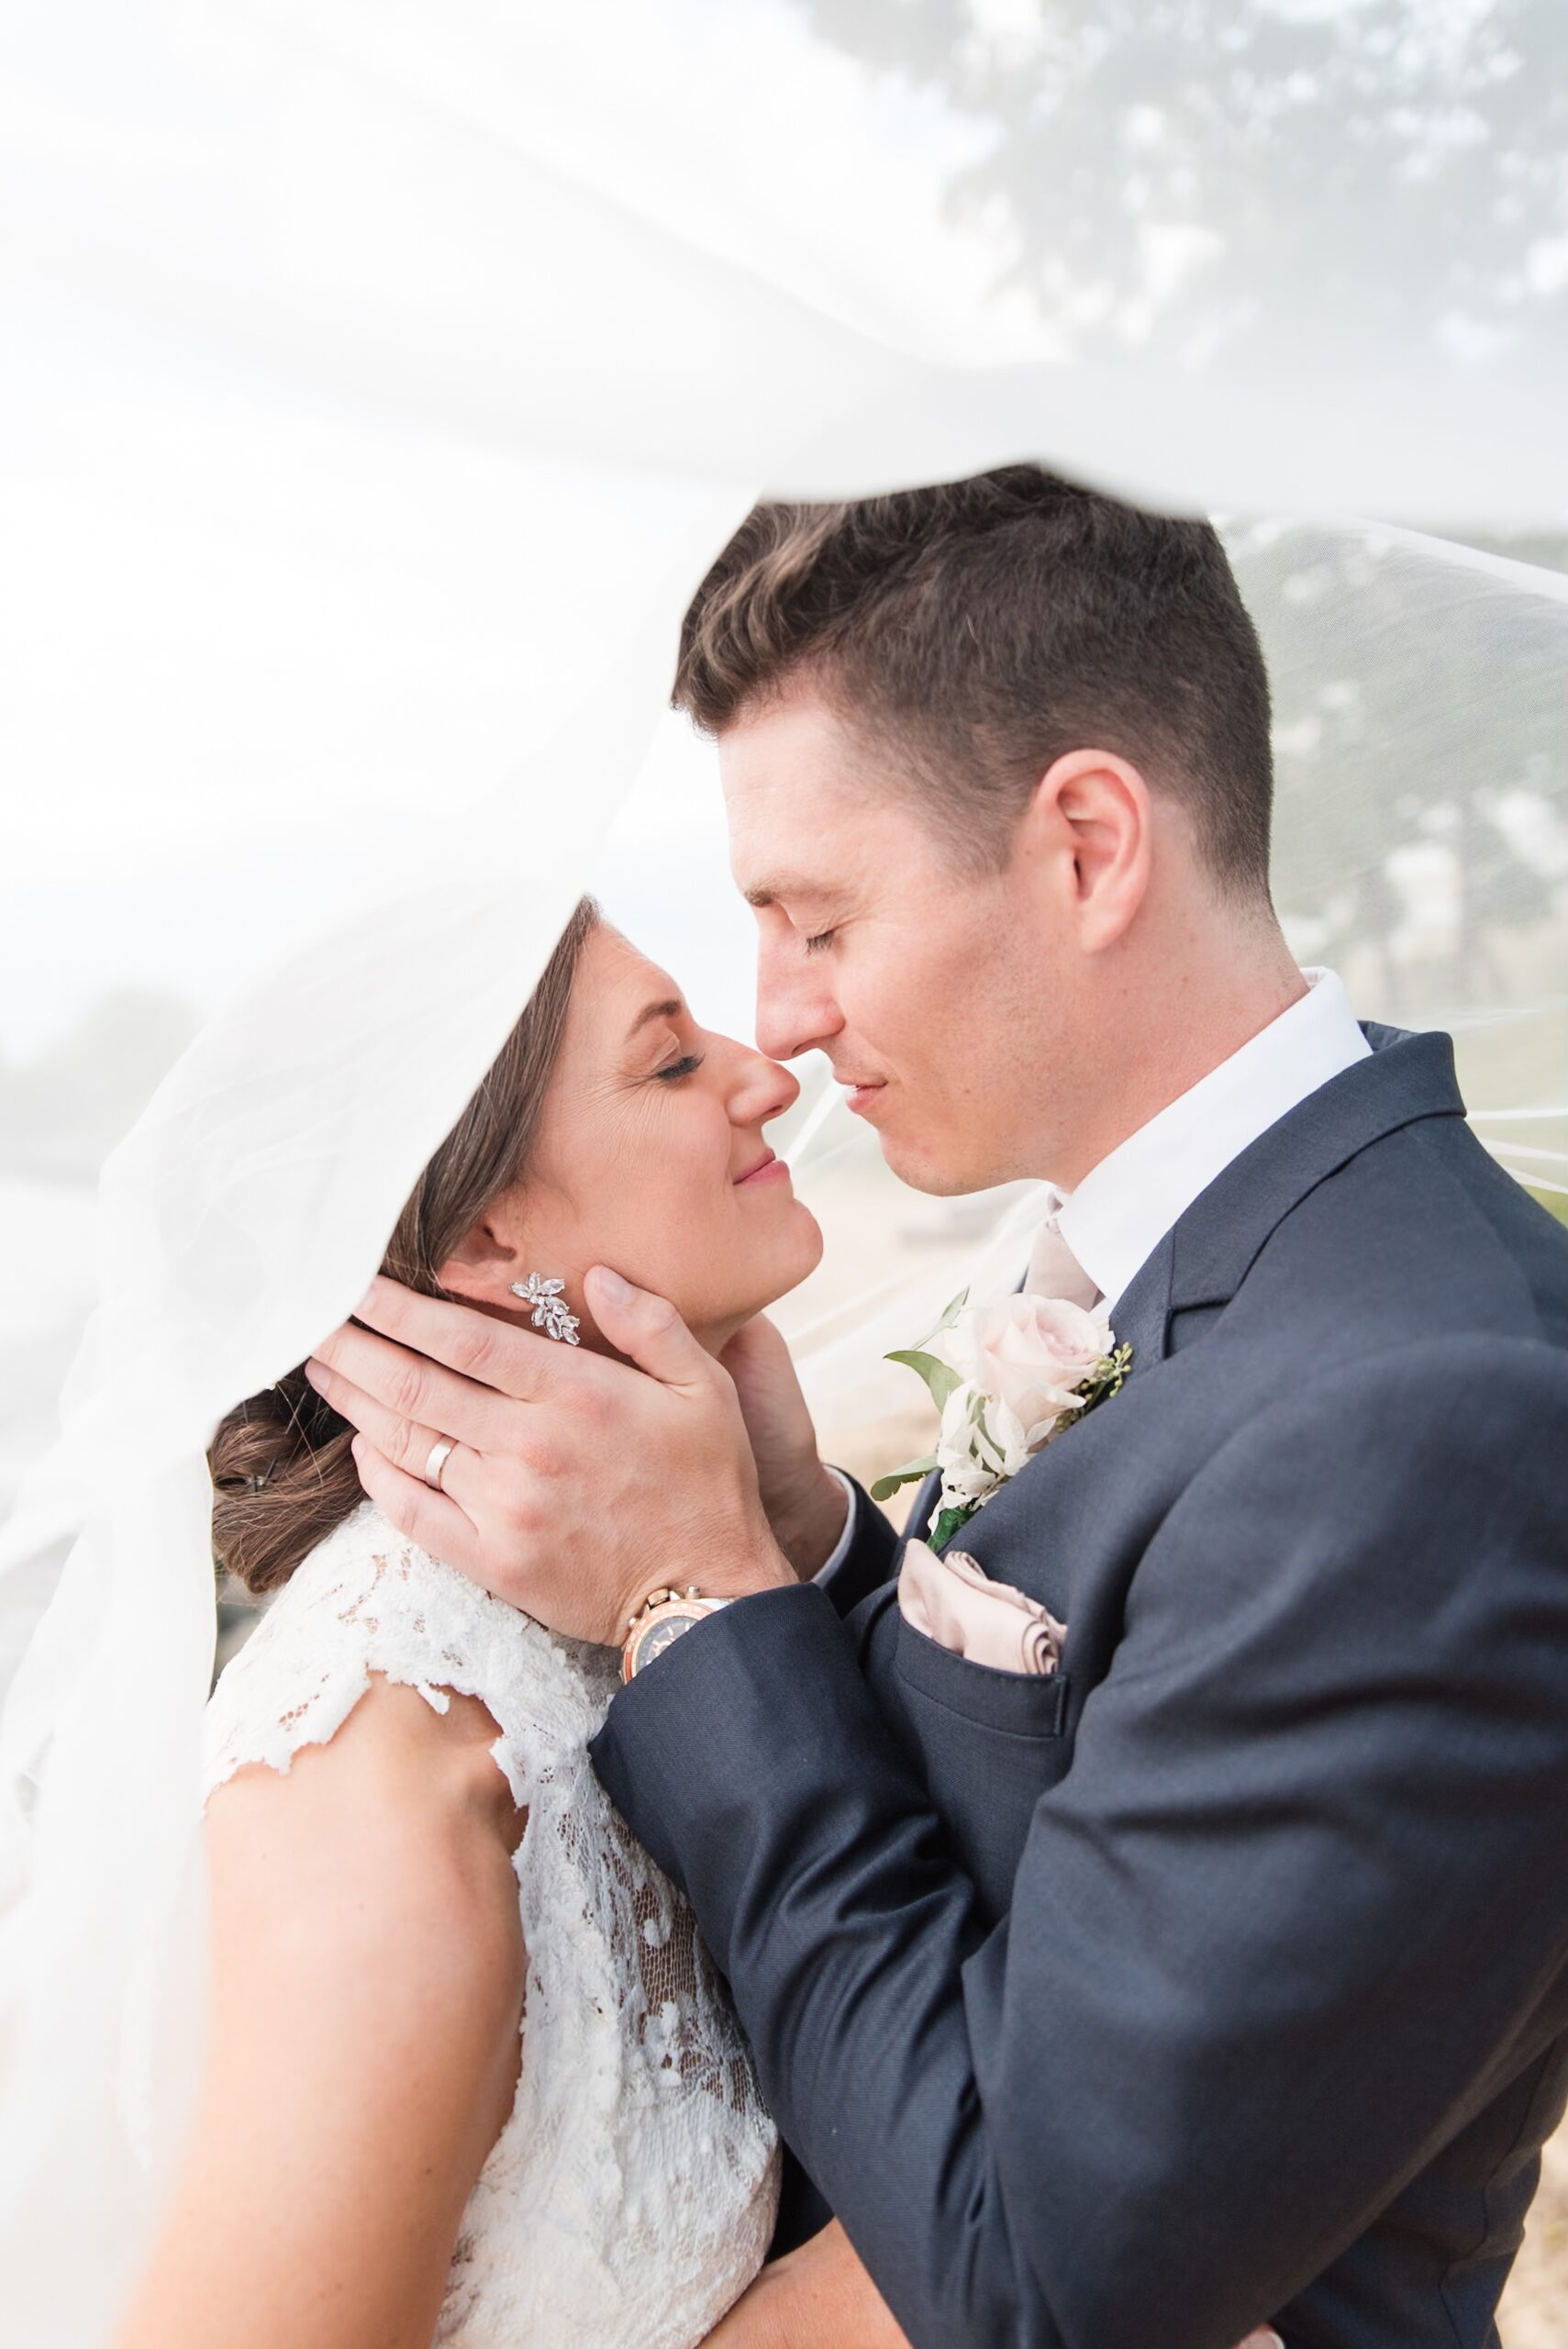 Newlyweds lean in for a happy kiss while hiding under a large veil outside during their William Paca House Wedding